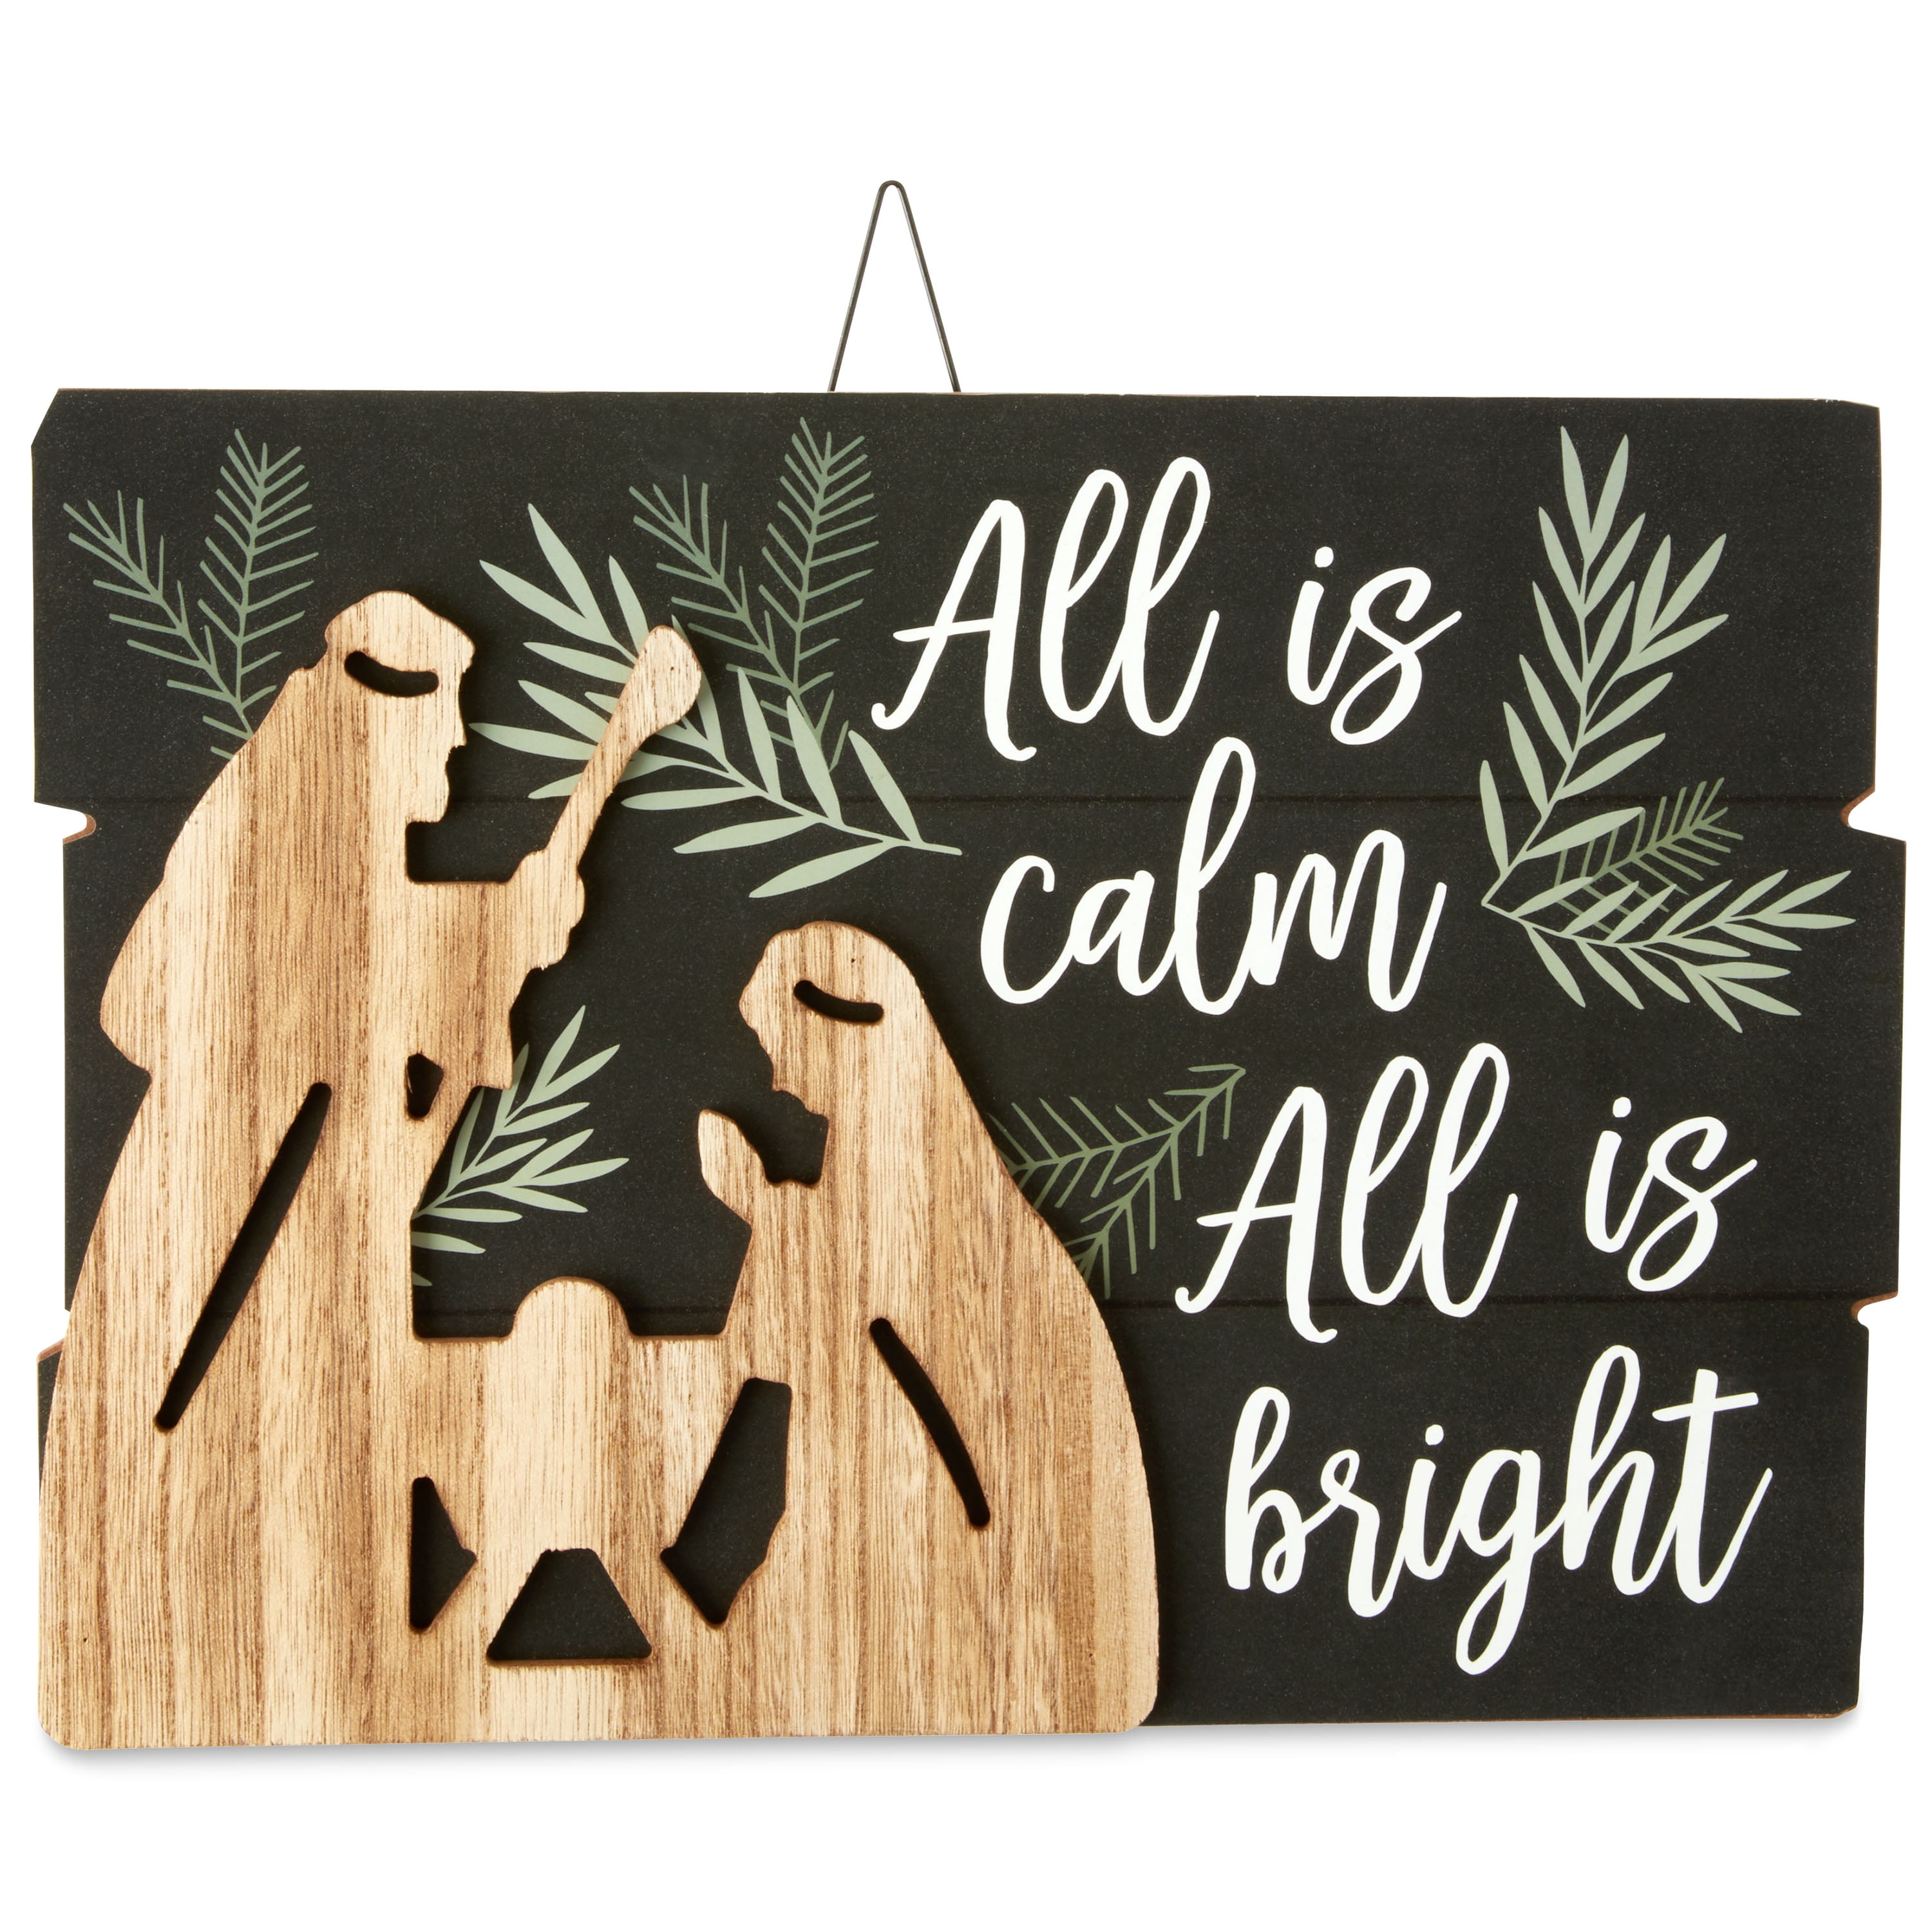 Holiday Time Nativity Wood Sign Wall Decor, All is Calm, 10"